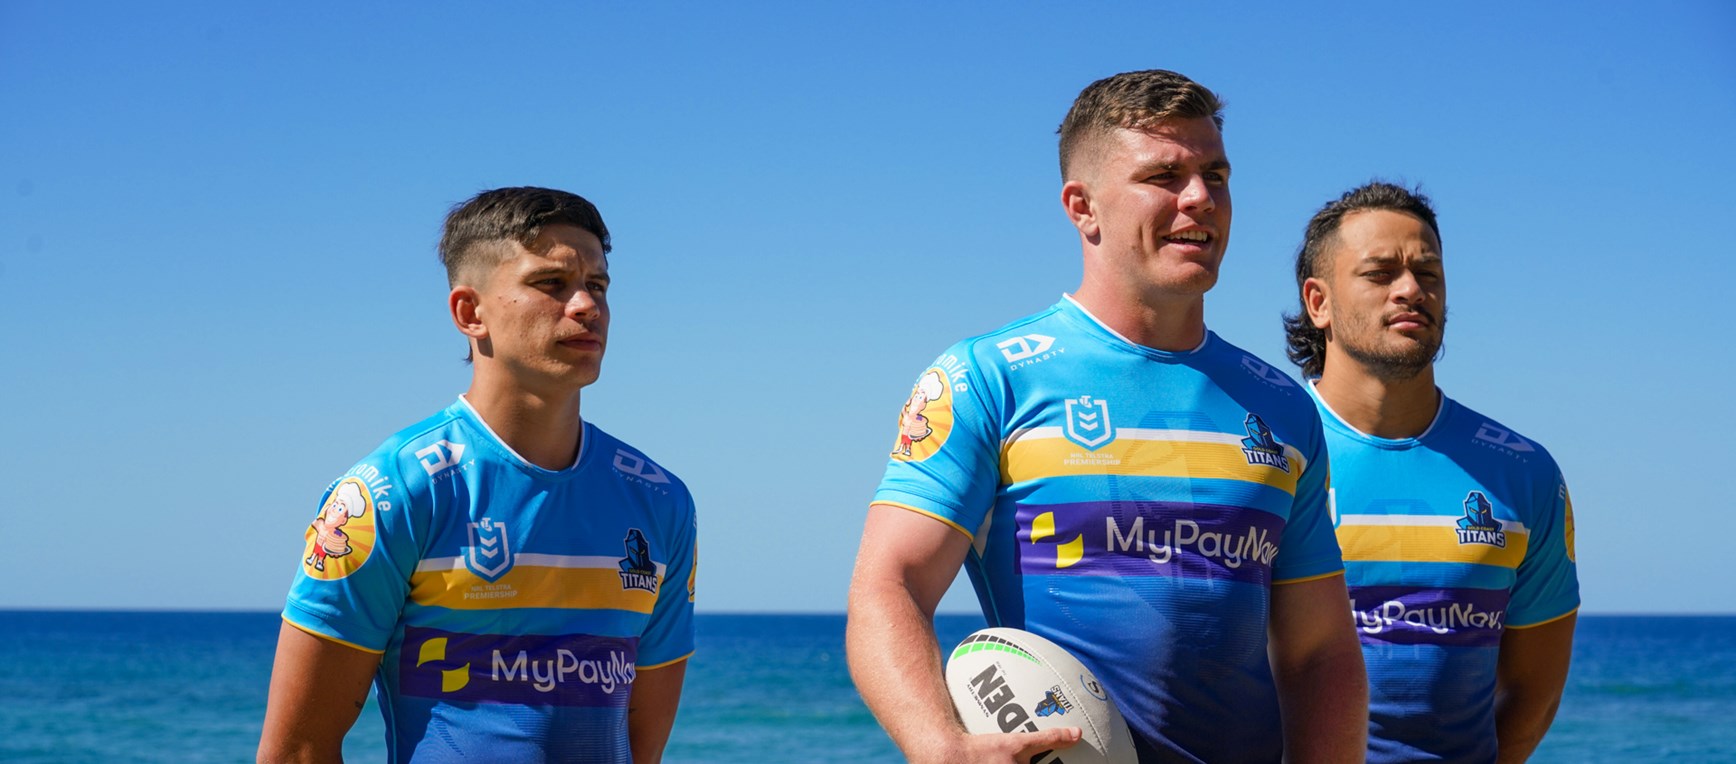 First Look - Titans players debut new jersey at iconic Burleigh Hill